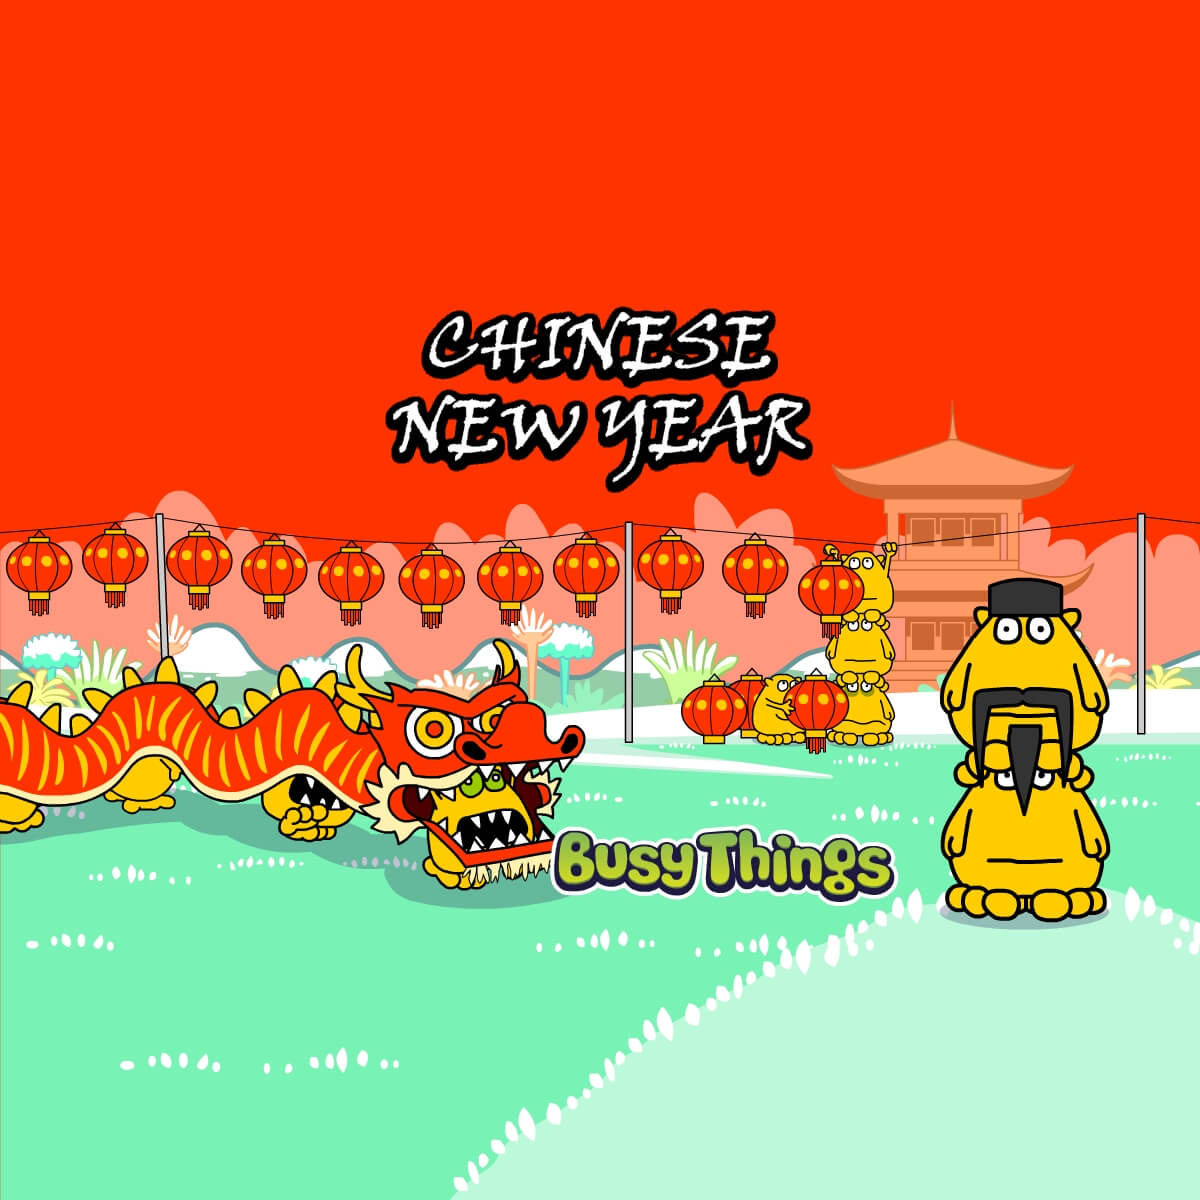 Chinese New Year Readers Theater Script - Lunar New Year - The Great Race